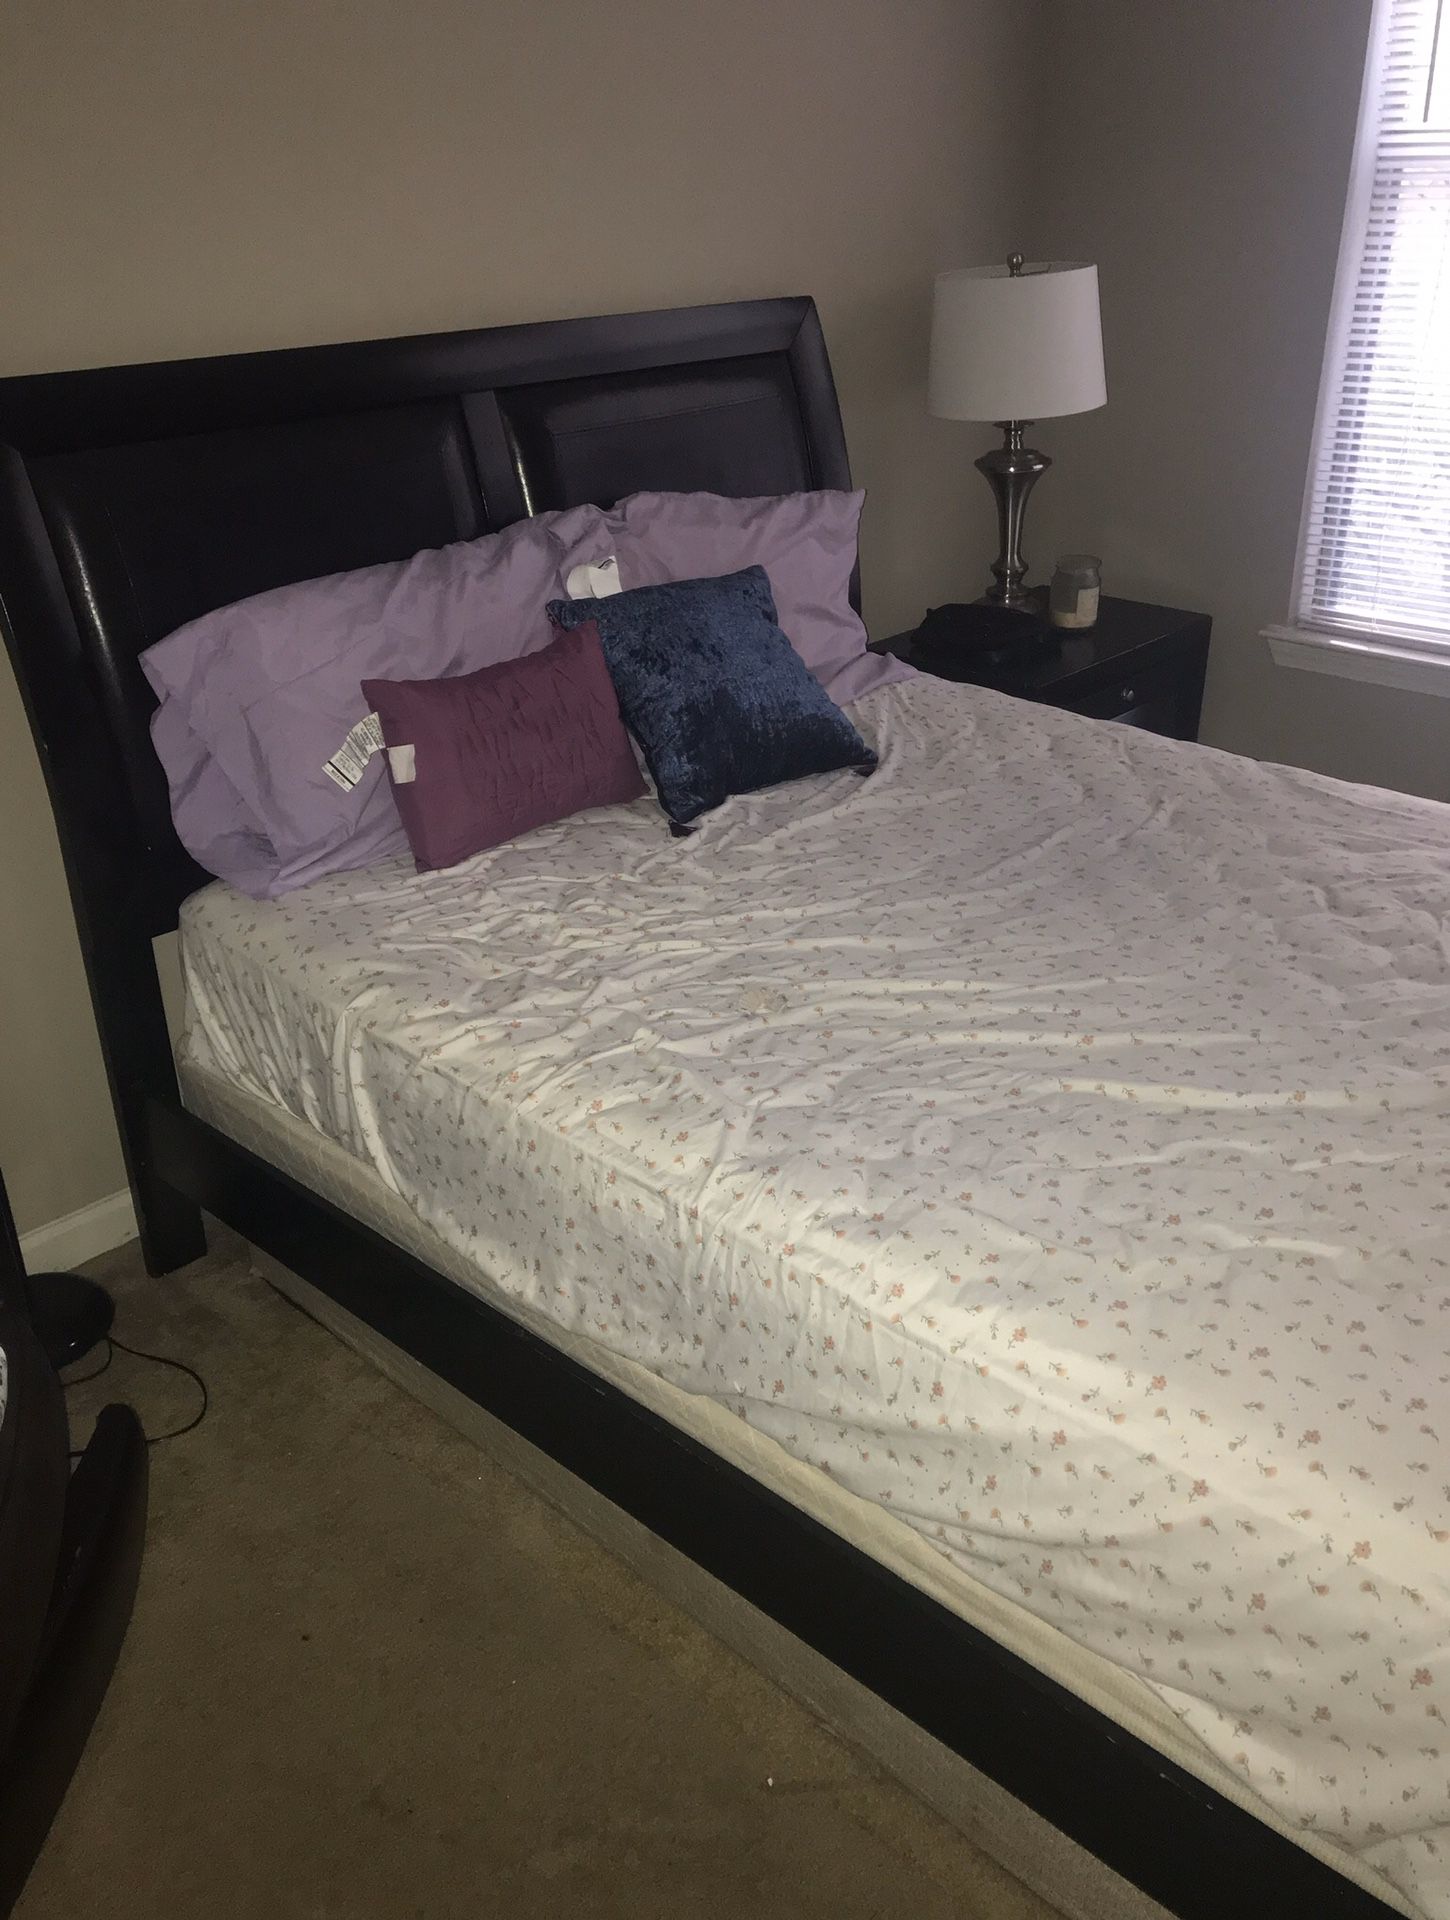 Queen bed plus frame